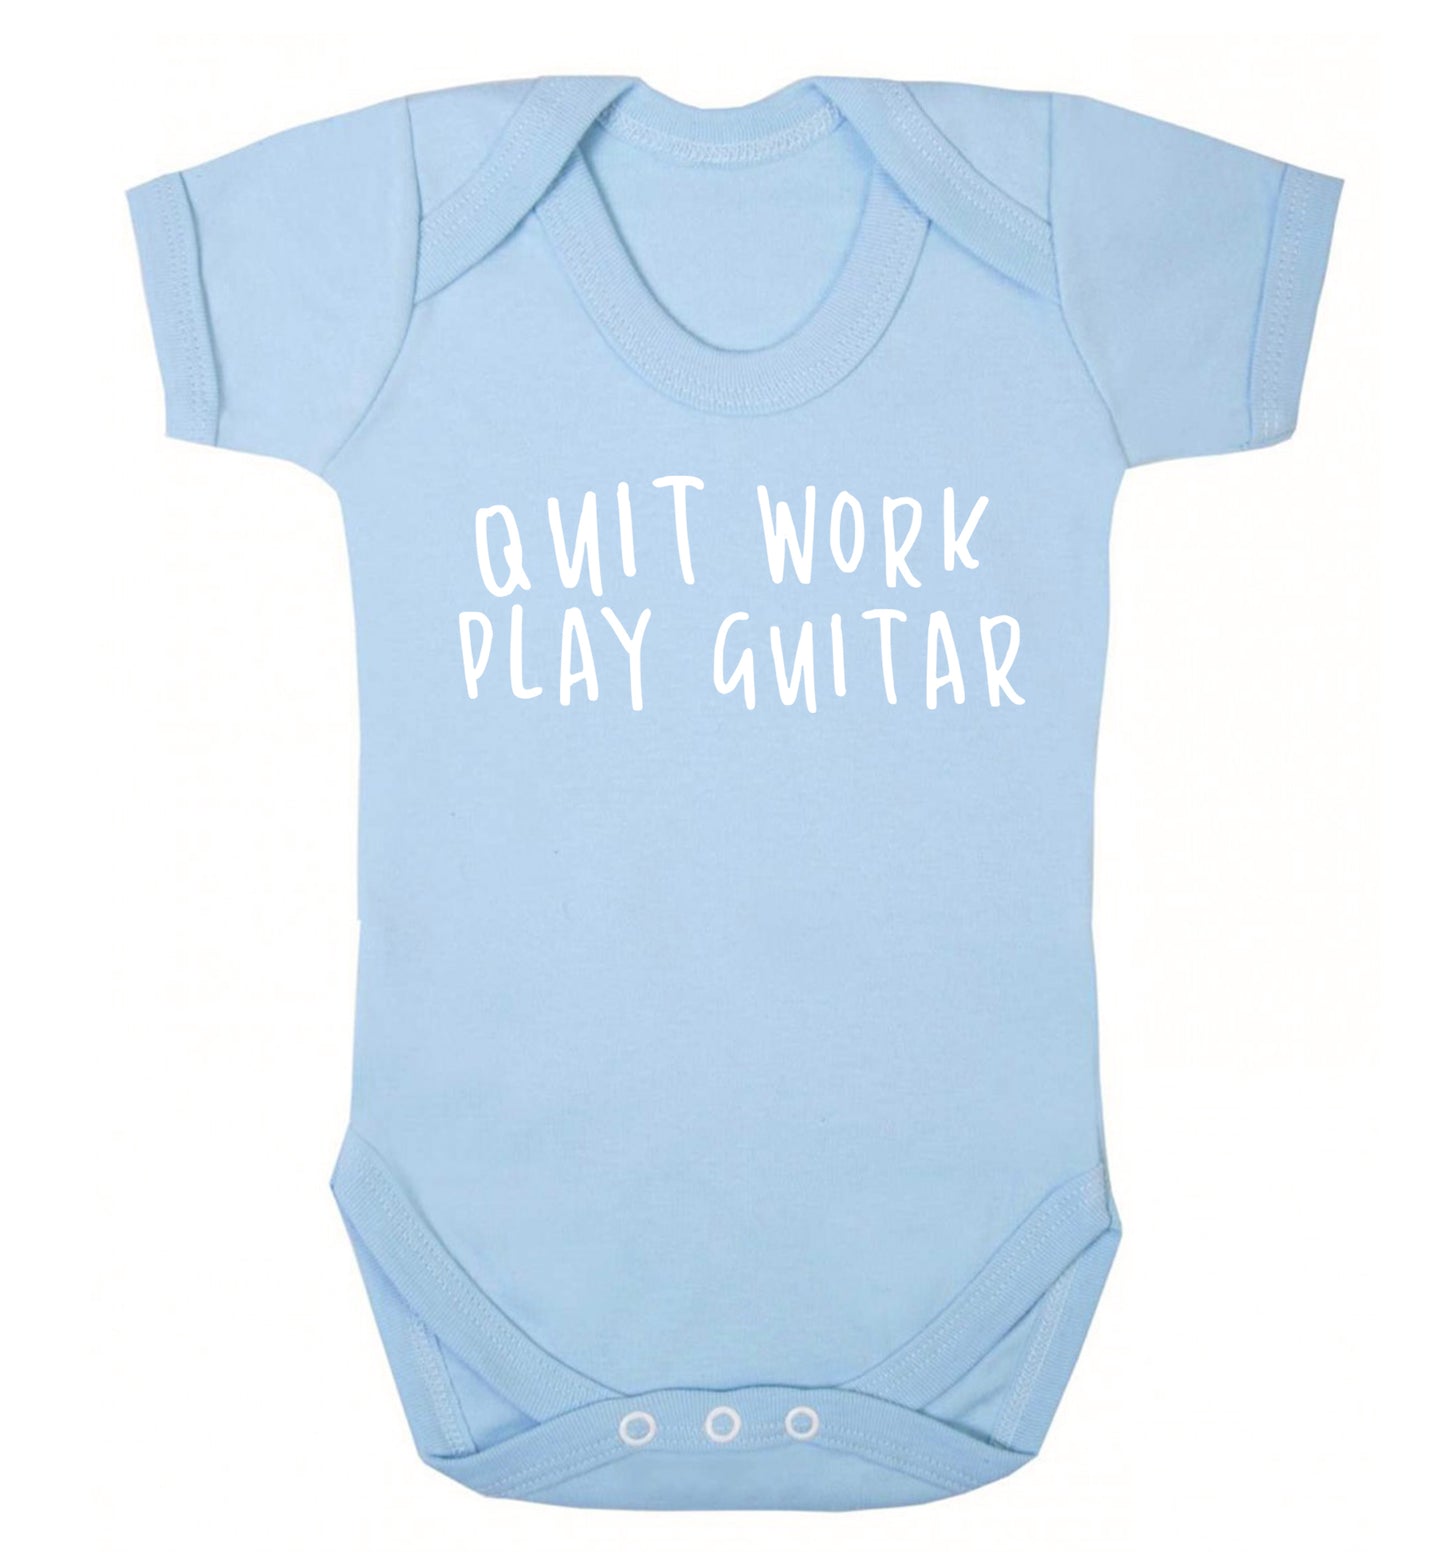 Quit work play guitar Baby Vest pale blue 18-24 months